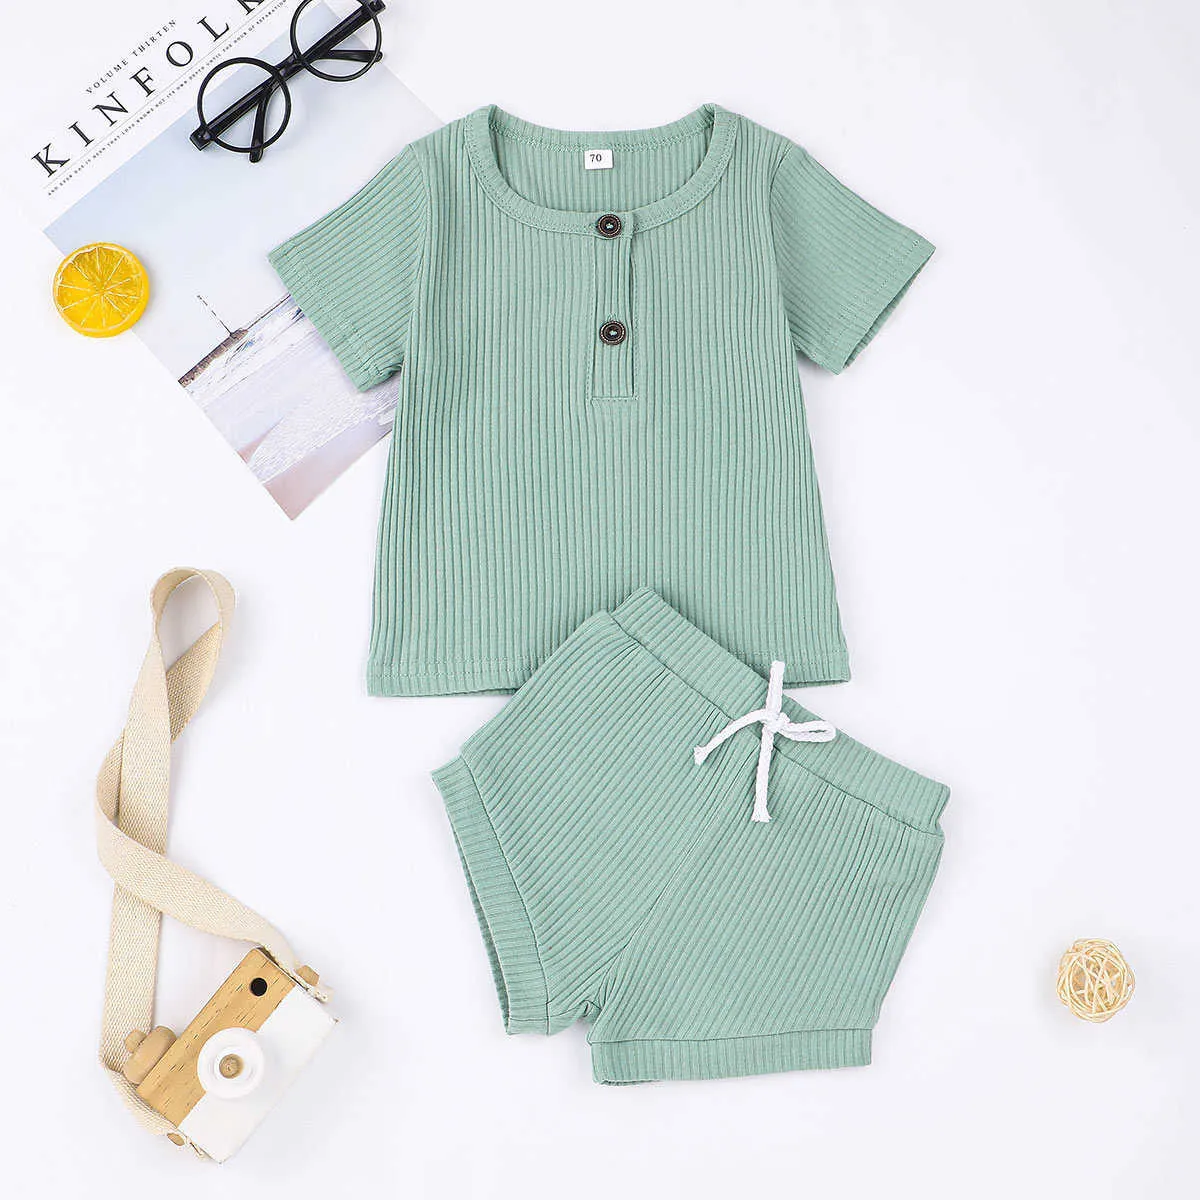 Clothing Sets Cotton Baby Clothes Set Summer Kintted Tops Shorts For Boys Girls Set Unisex Toddlers Pieces Kids Baby Clothing